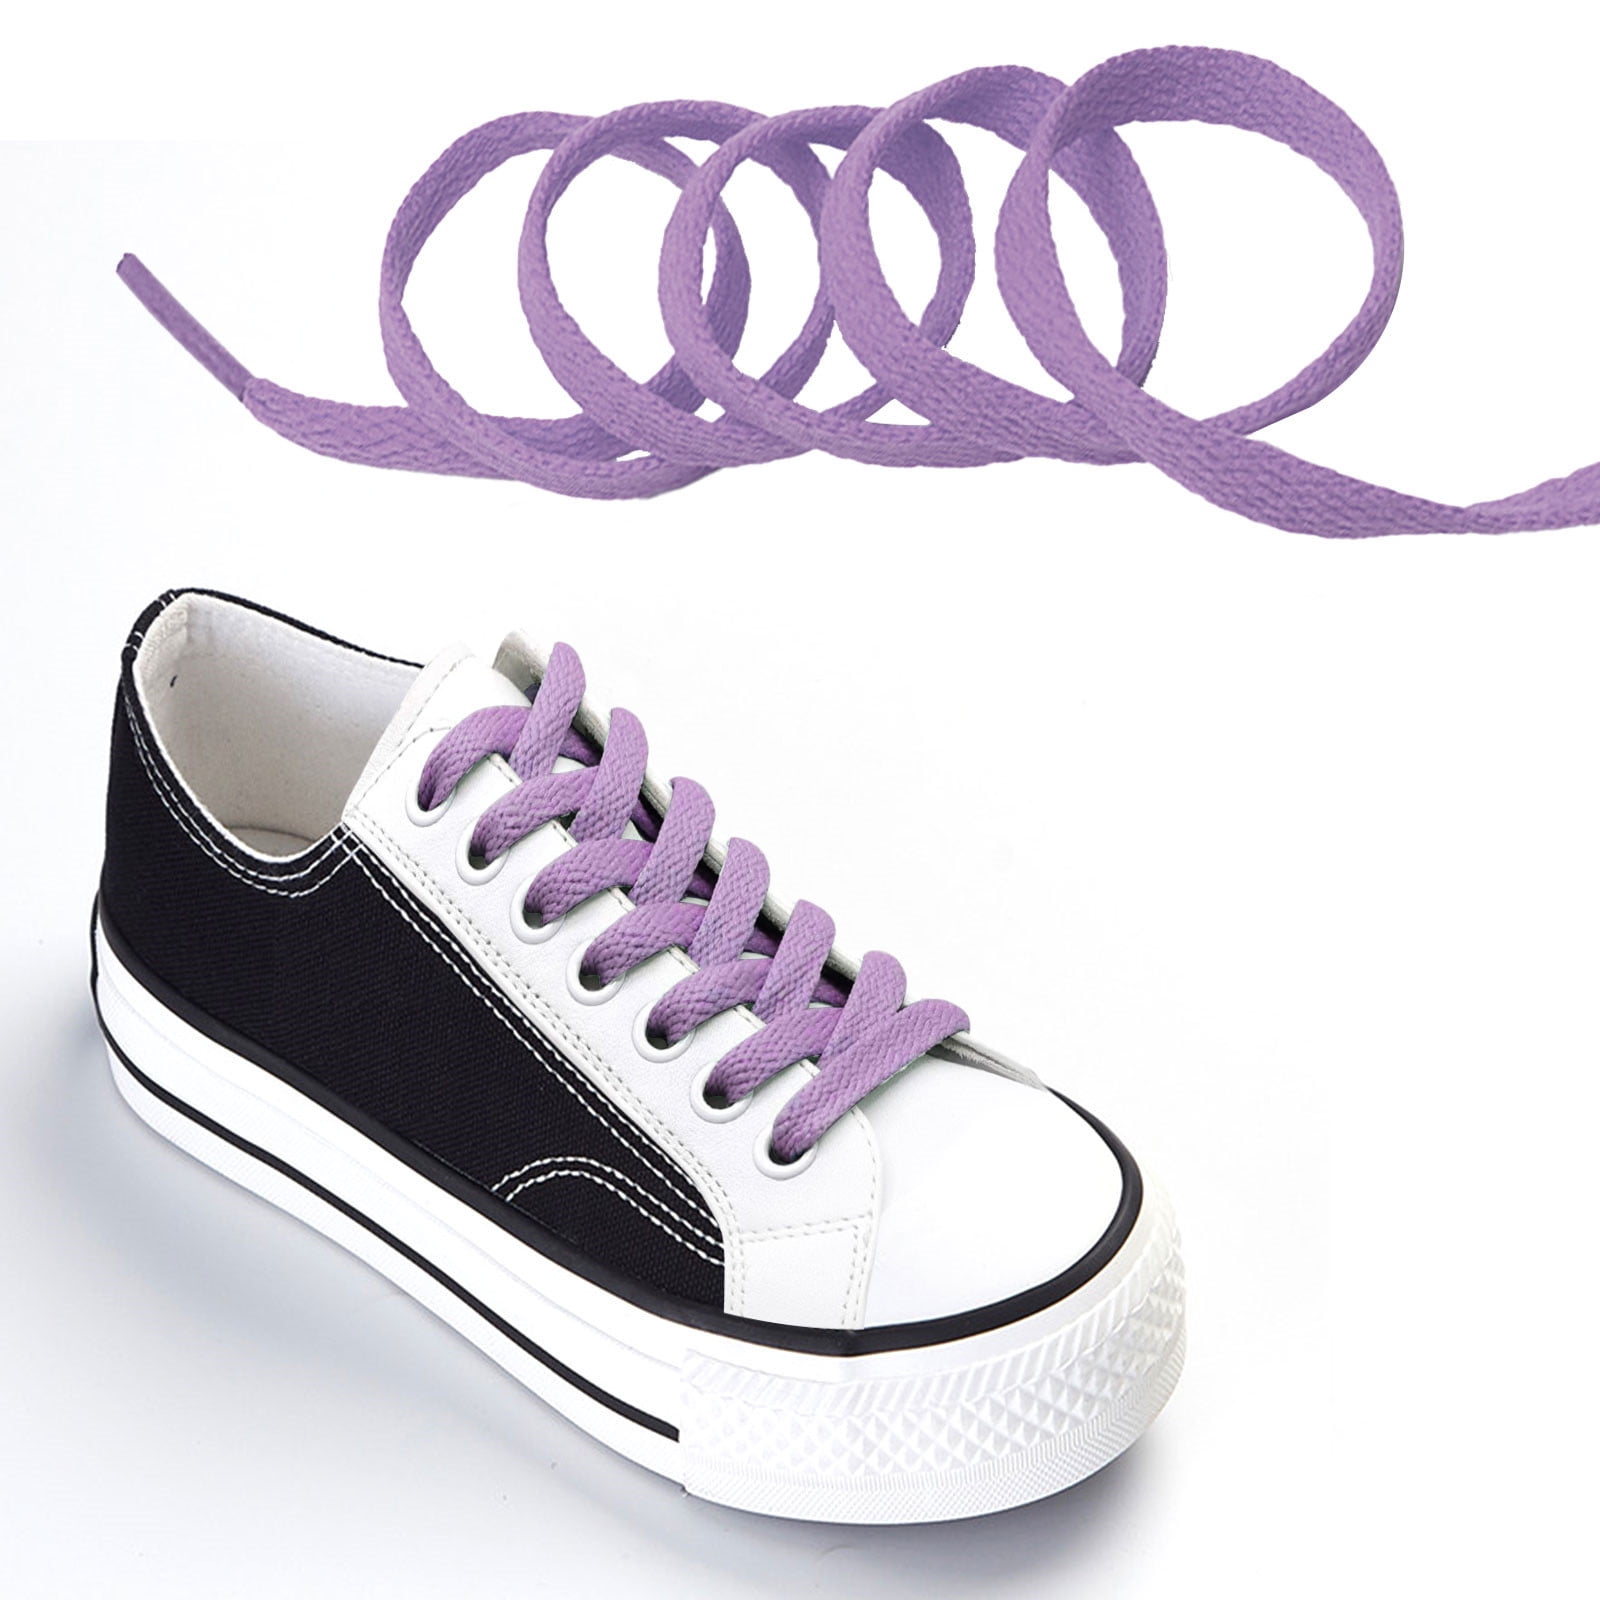 Flat Shoelaces Wide Shoes Lace - Wide Shoelaces Flat Shoe Laces for Sneakers and Shoes 2 Pair 